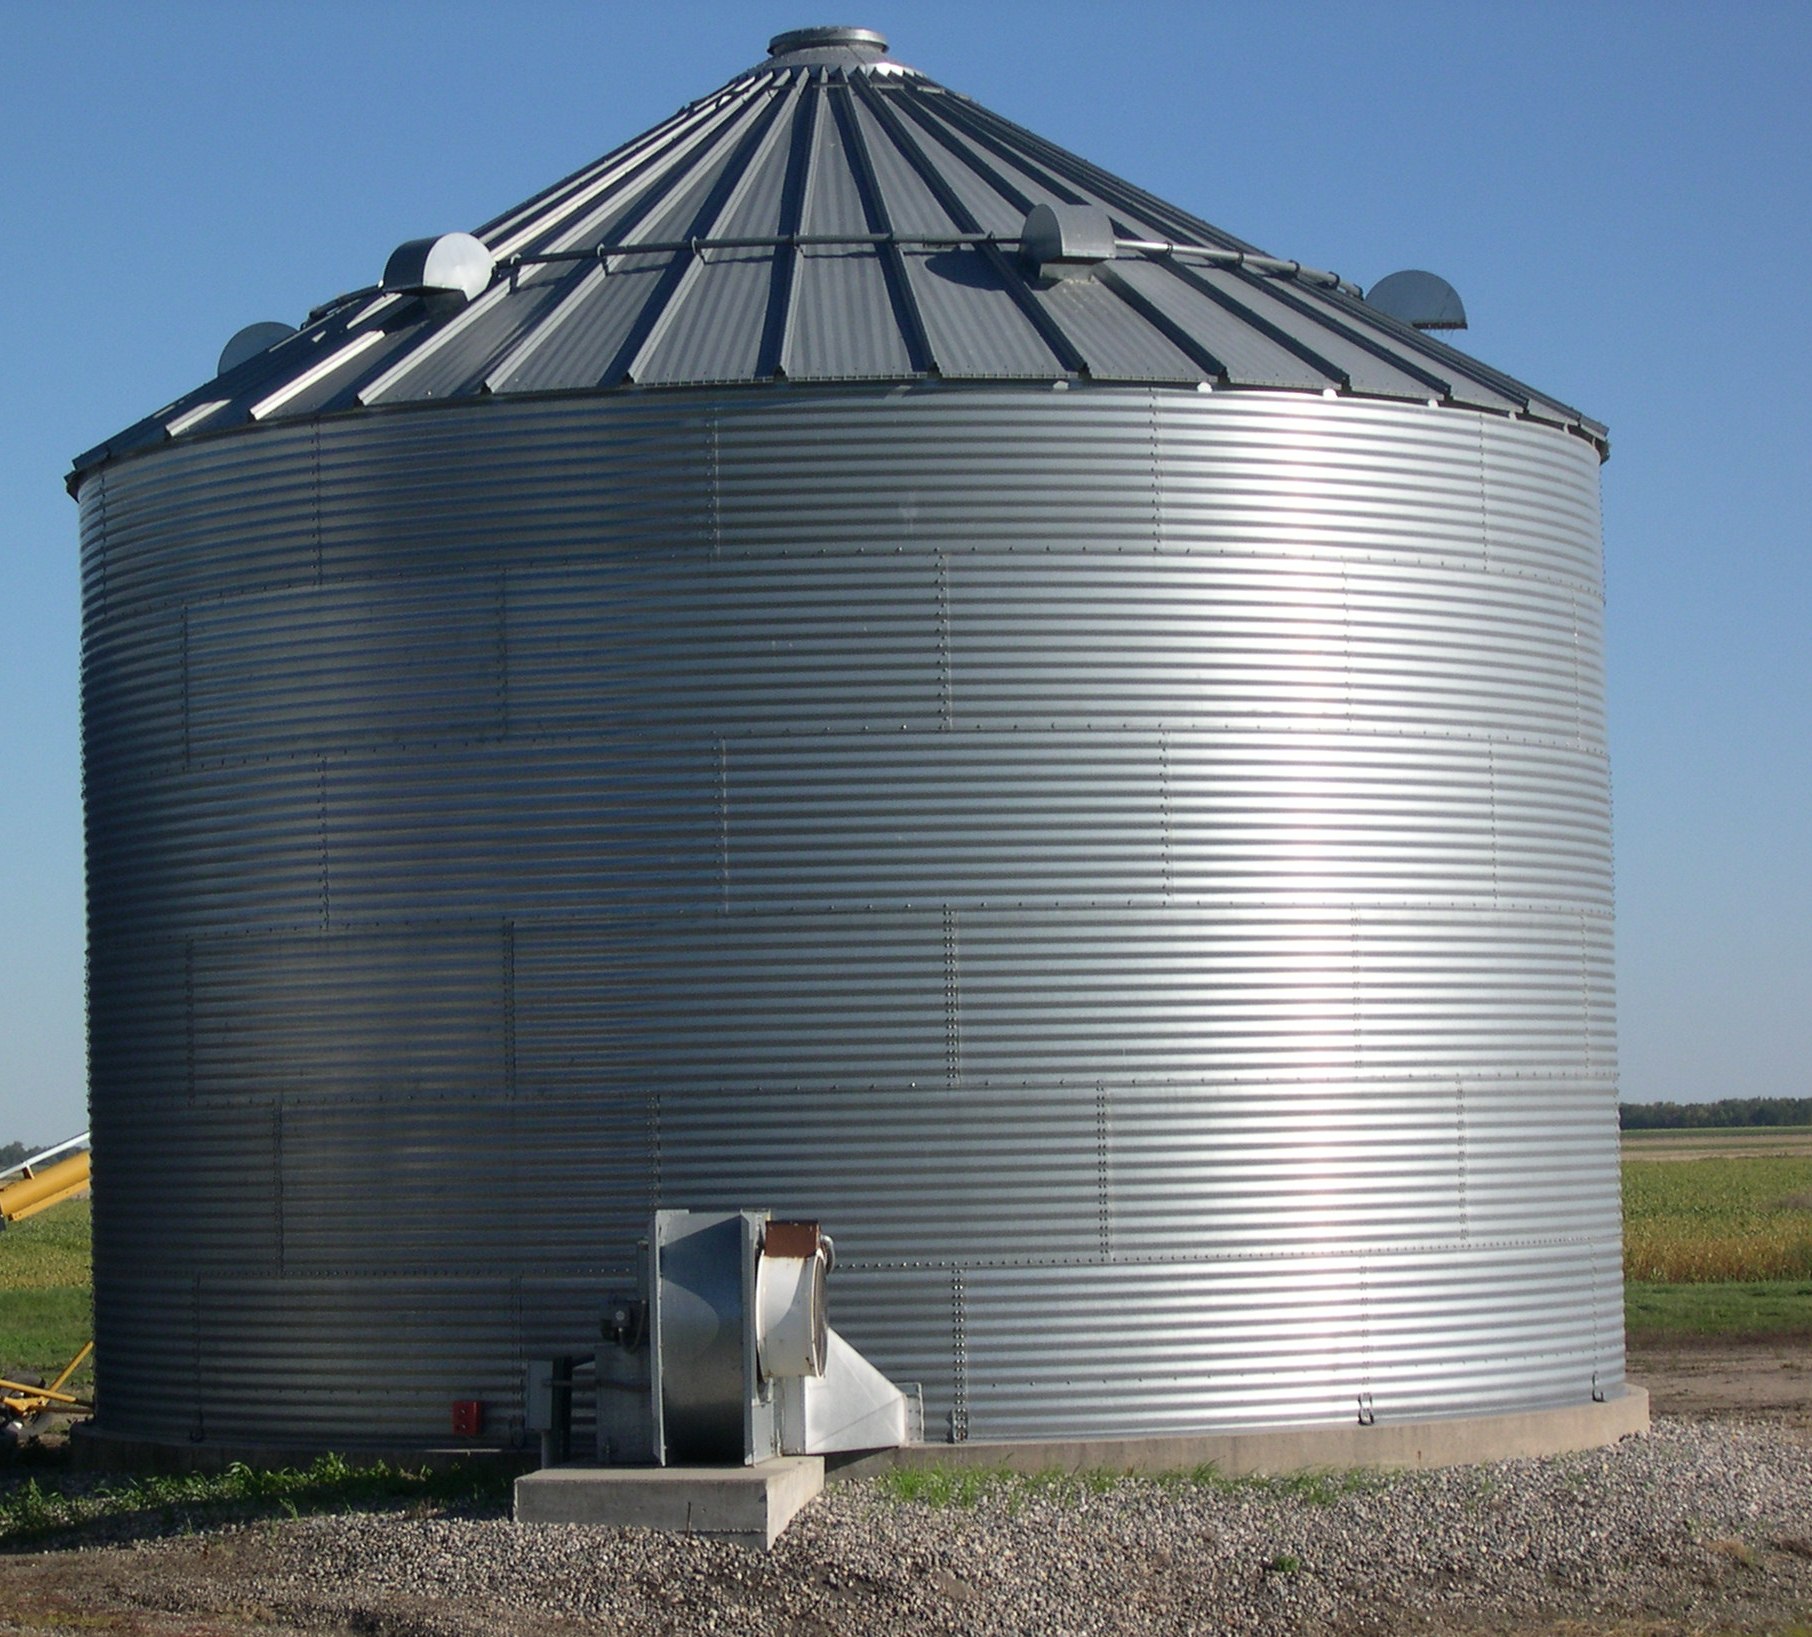 Stored grain should be monitored closely to detect any storage problems early. (NDSU photo)